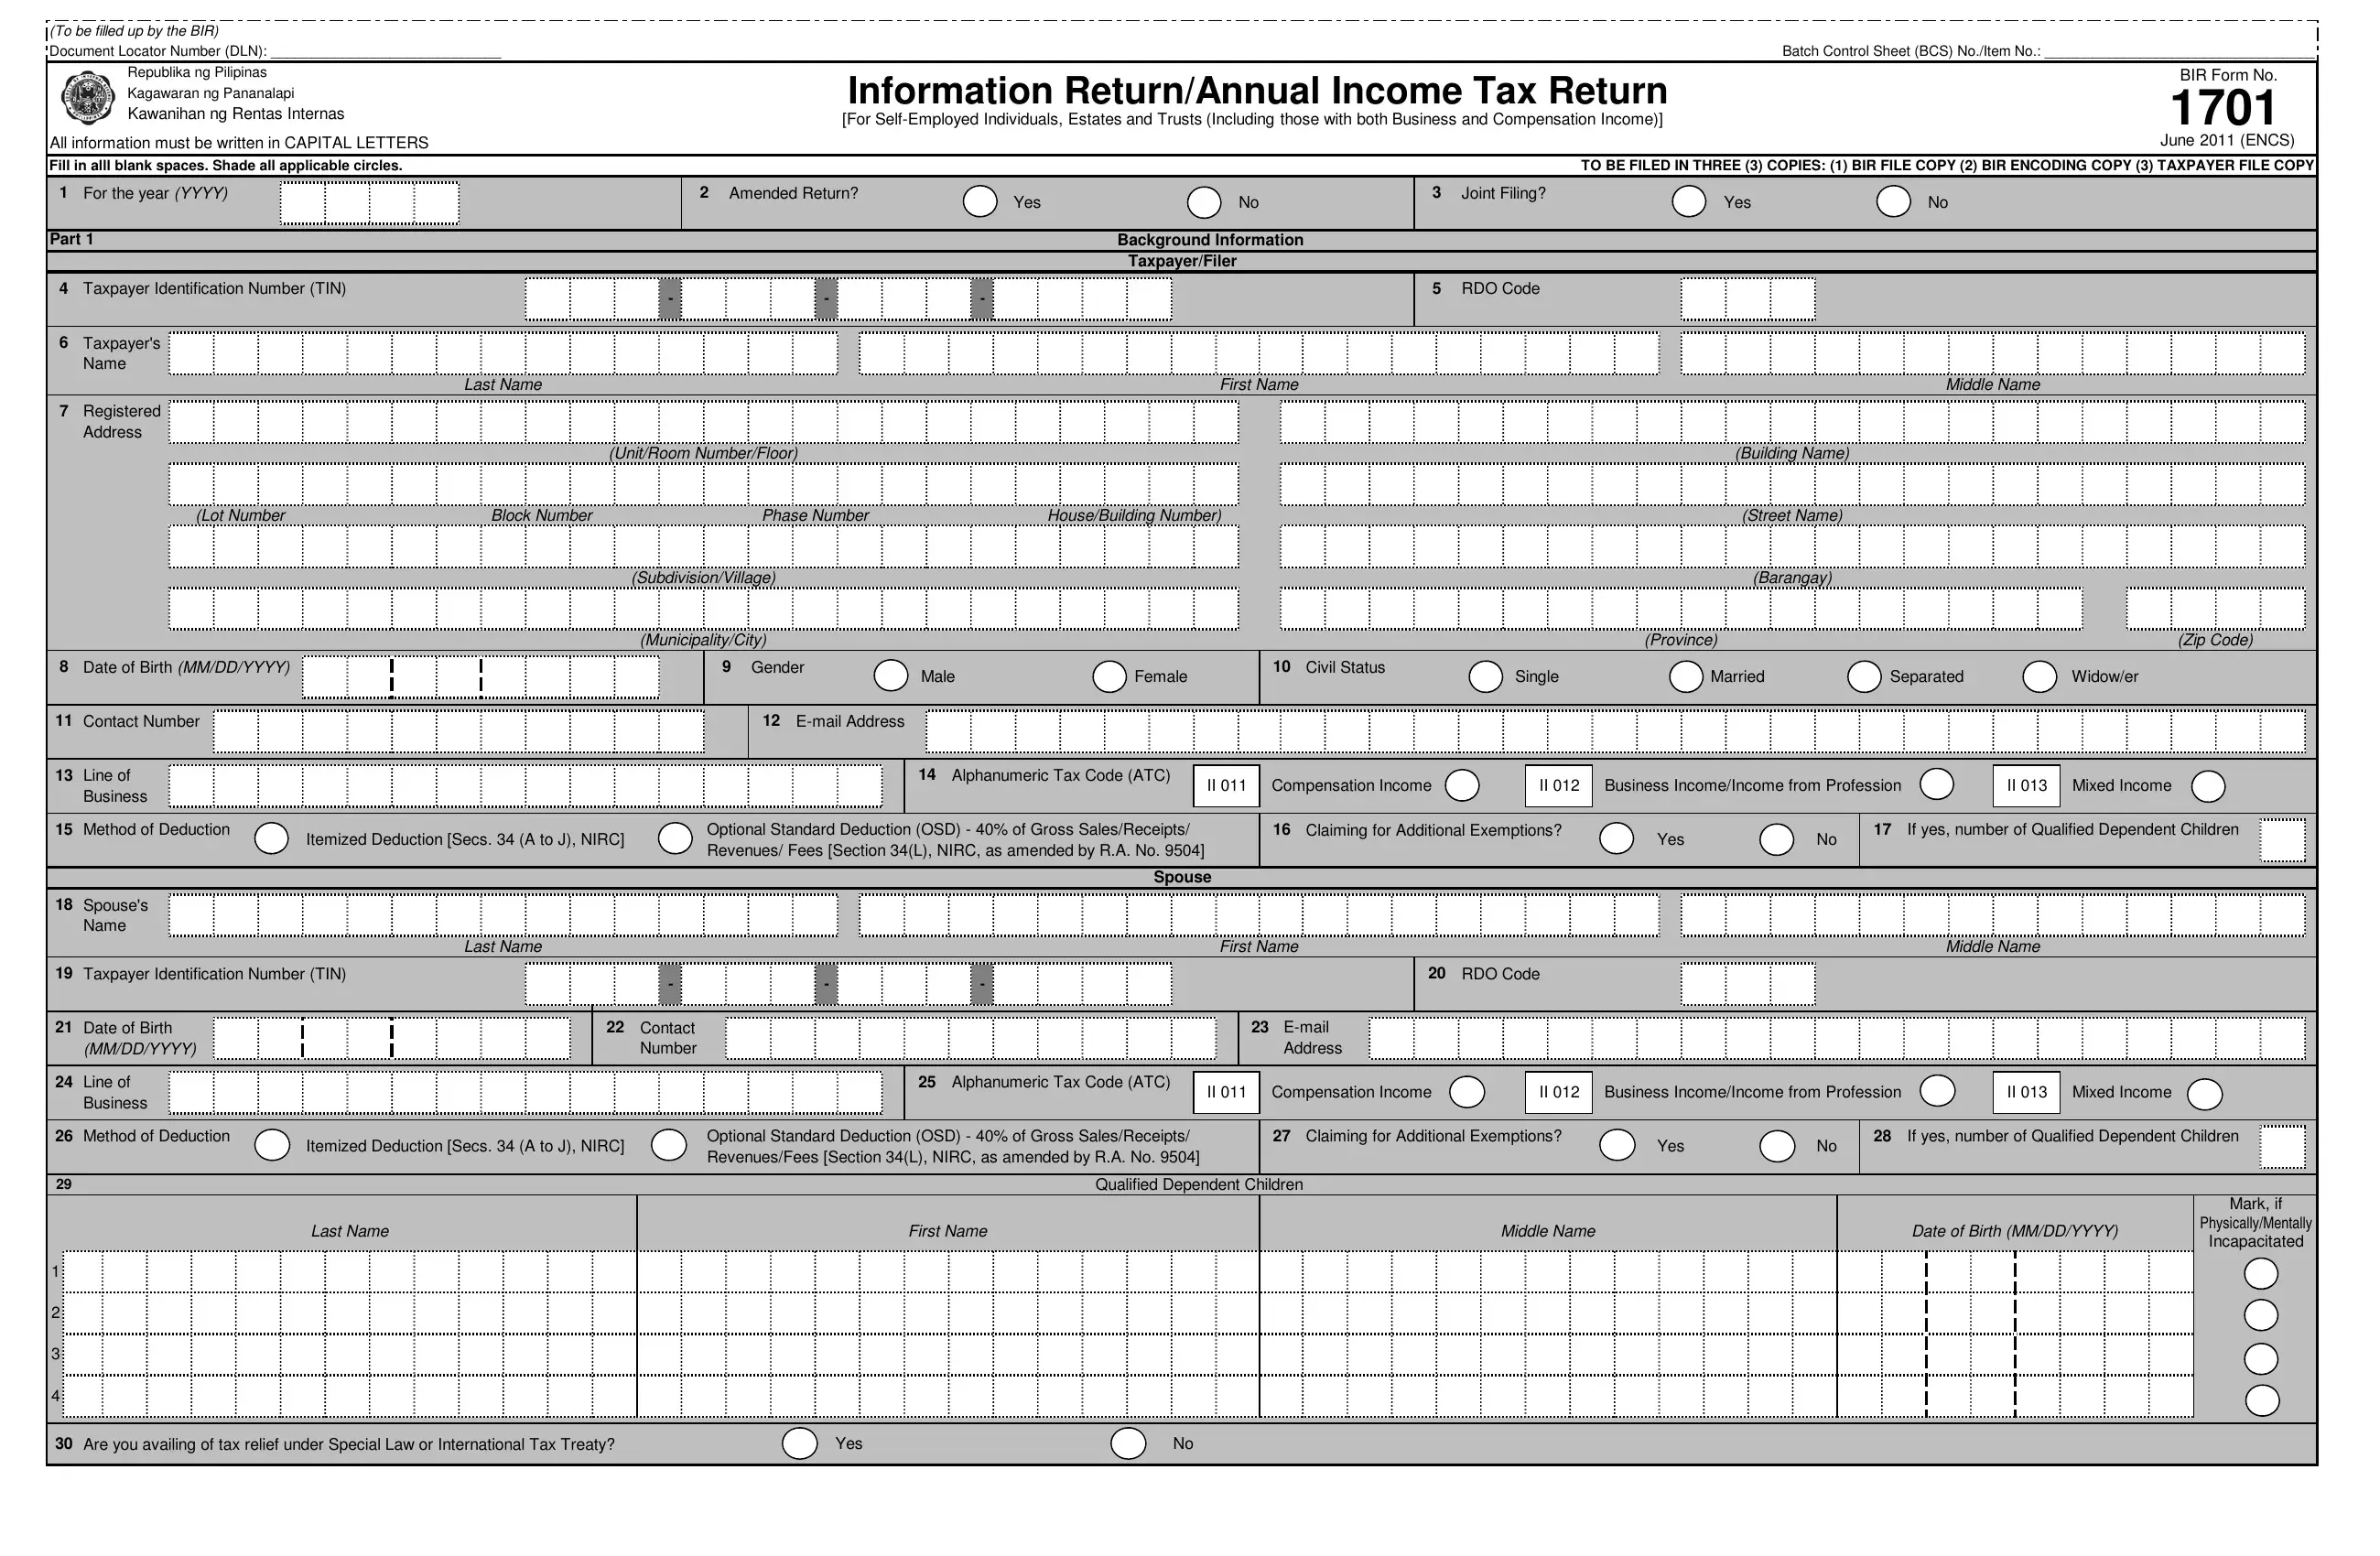 Annual Income Tax Return Form 1701 Preview